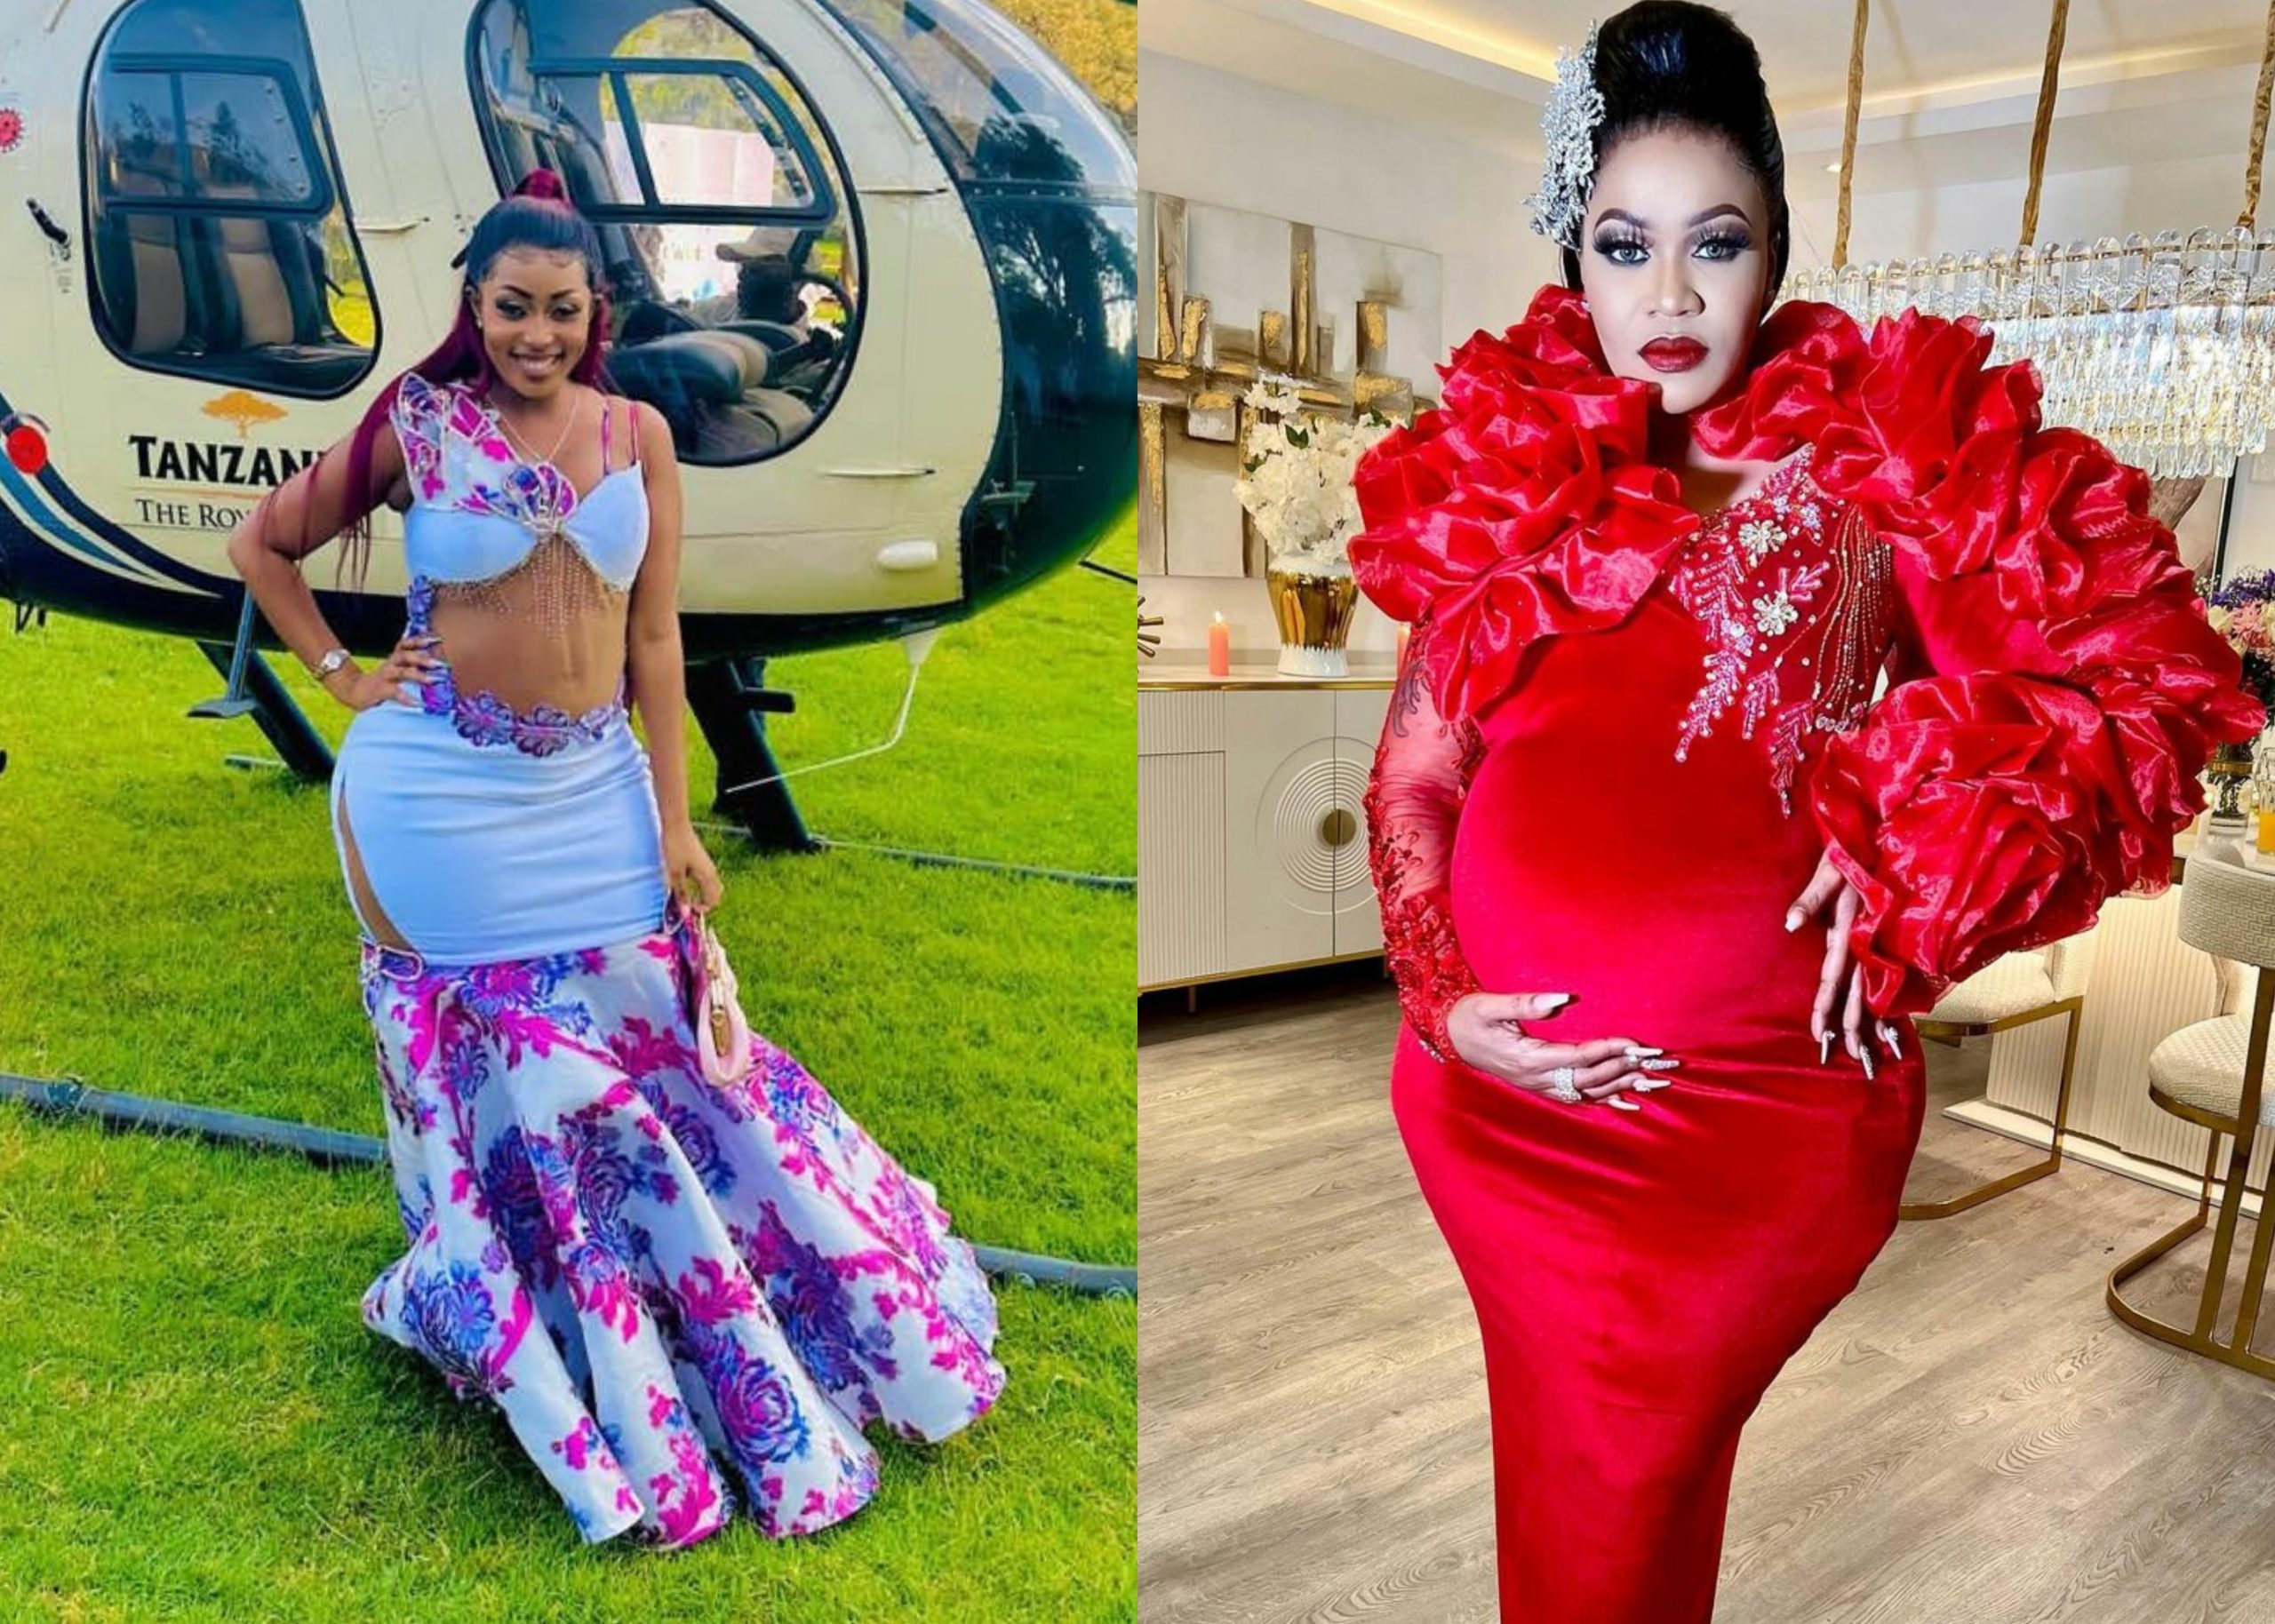 Vera Sidika picking beef with Amber Ray over baby shower is just juvenile